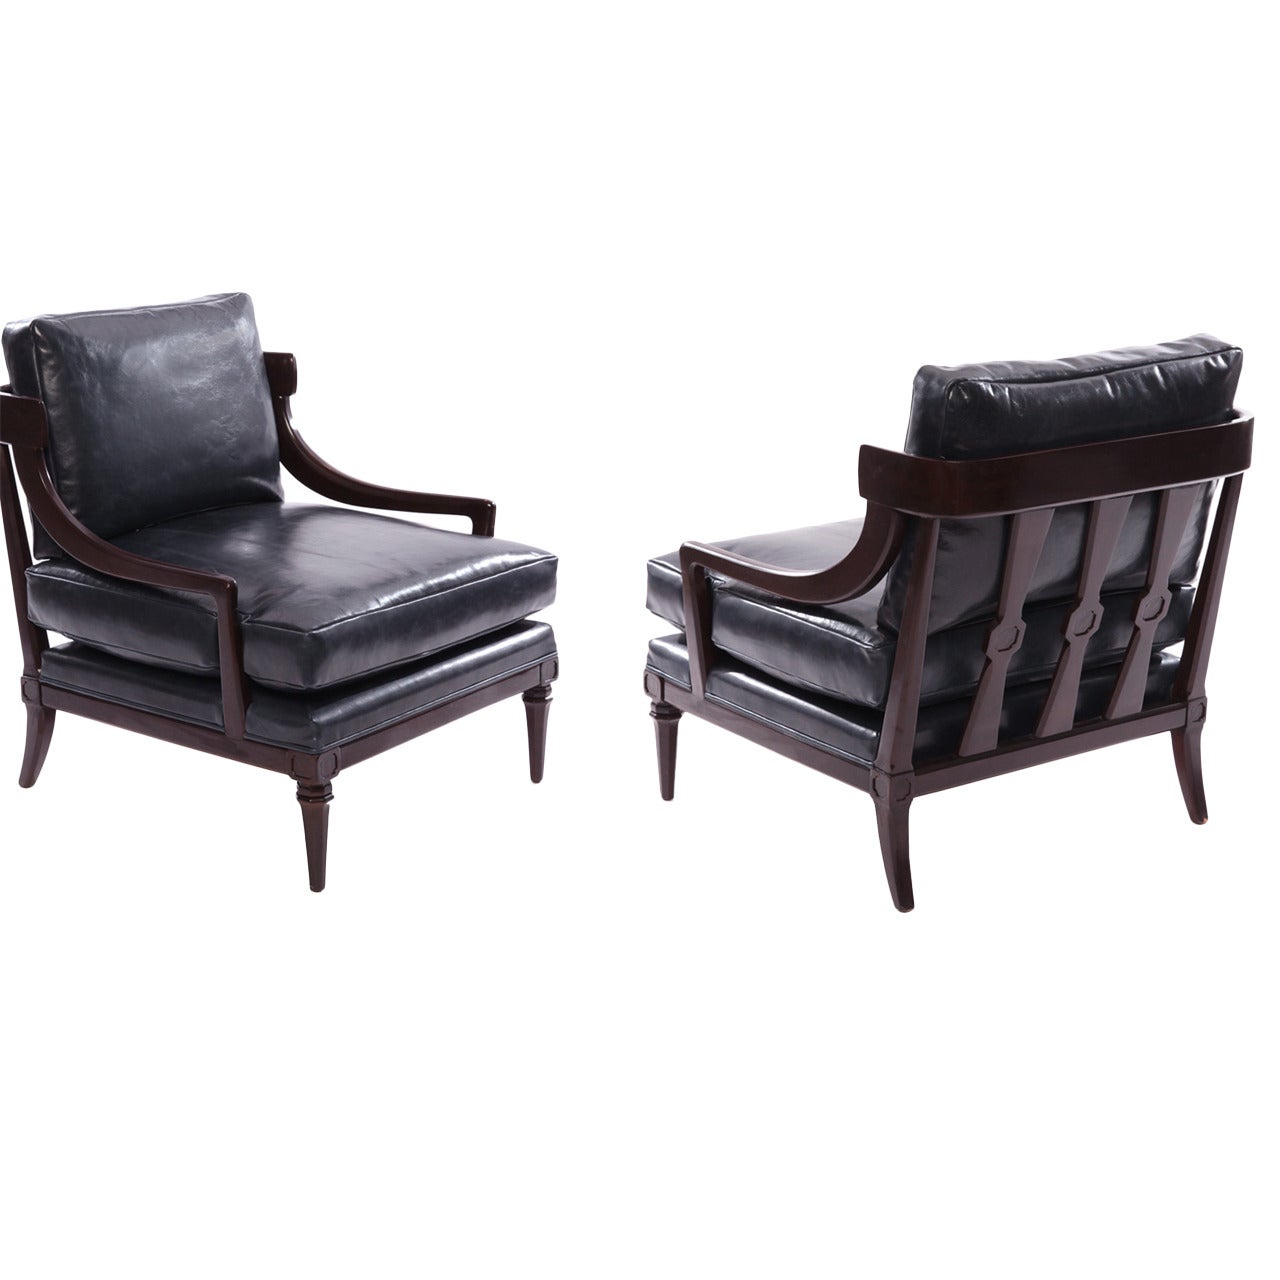 Mahogany and Leather Decorative Lounge Chairs